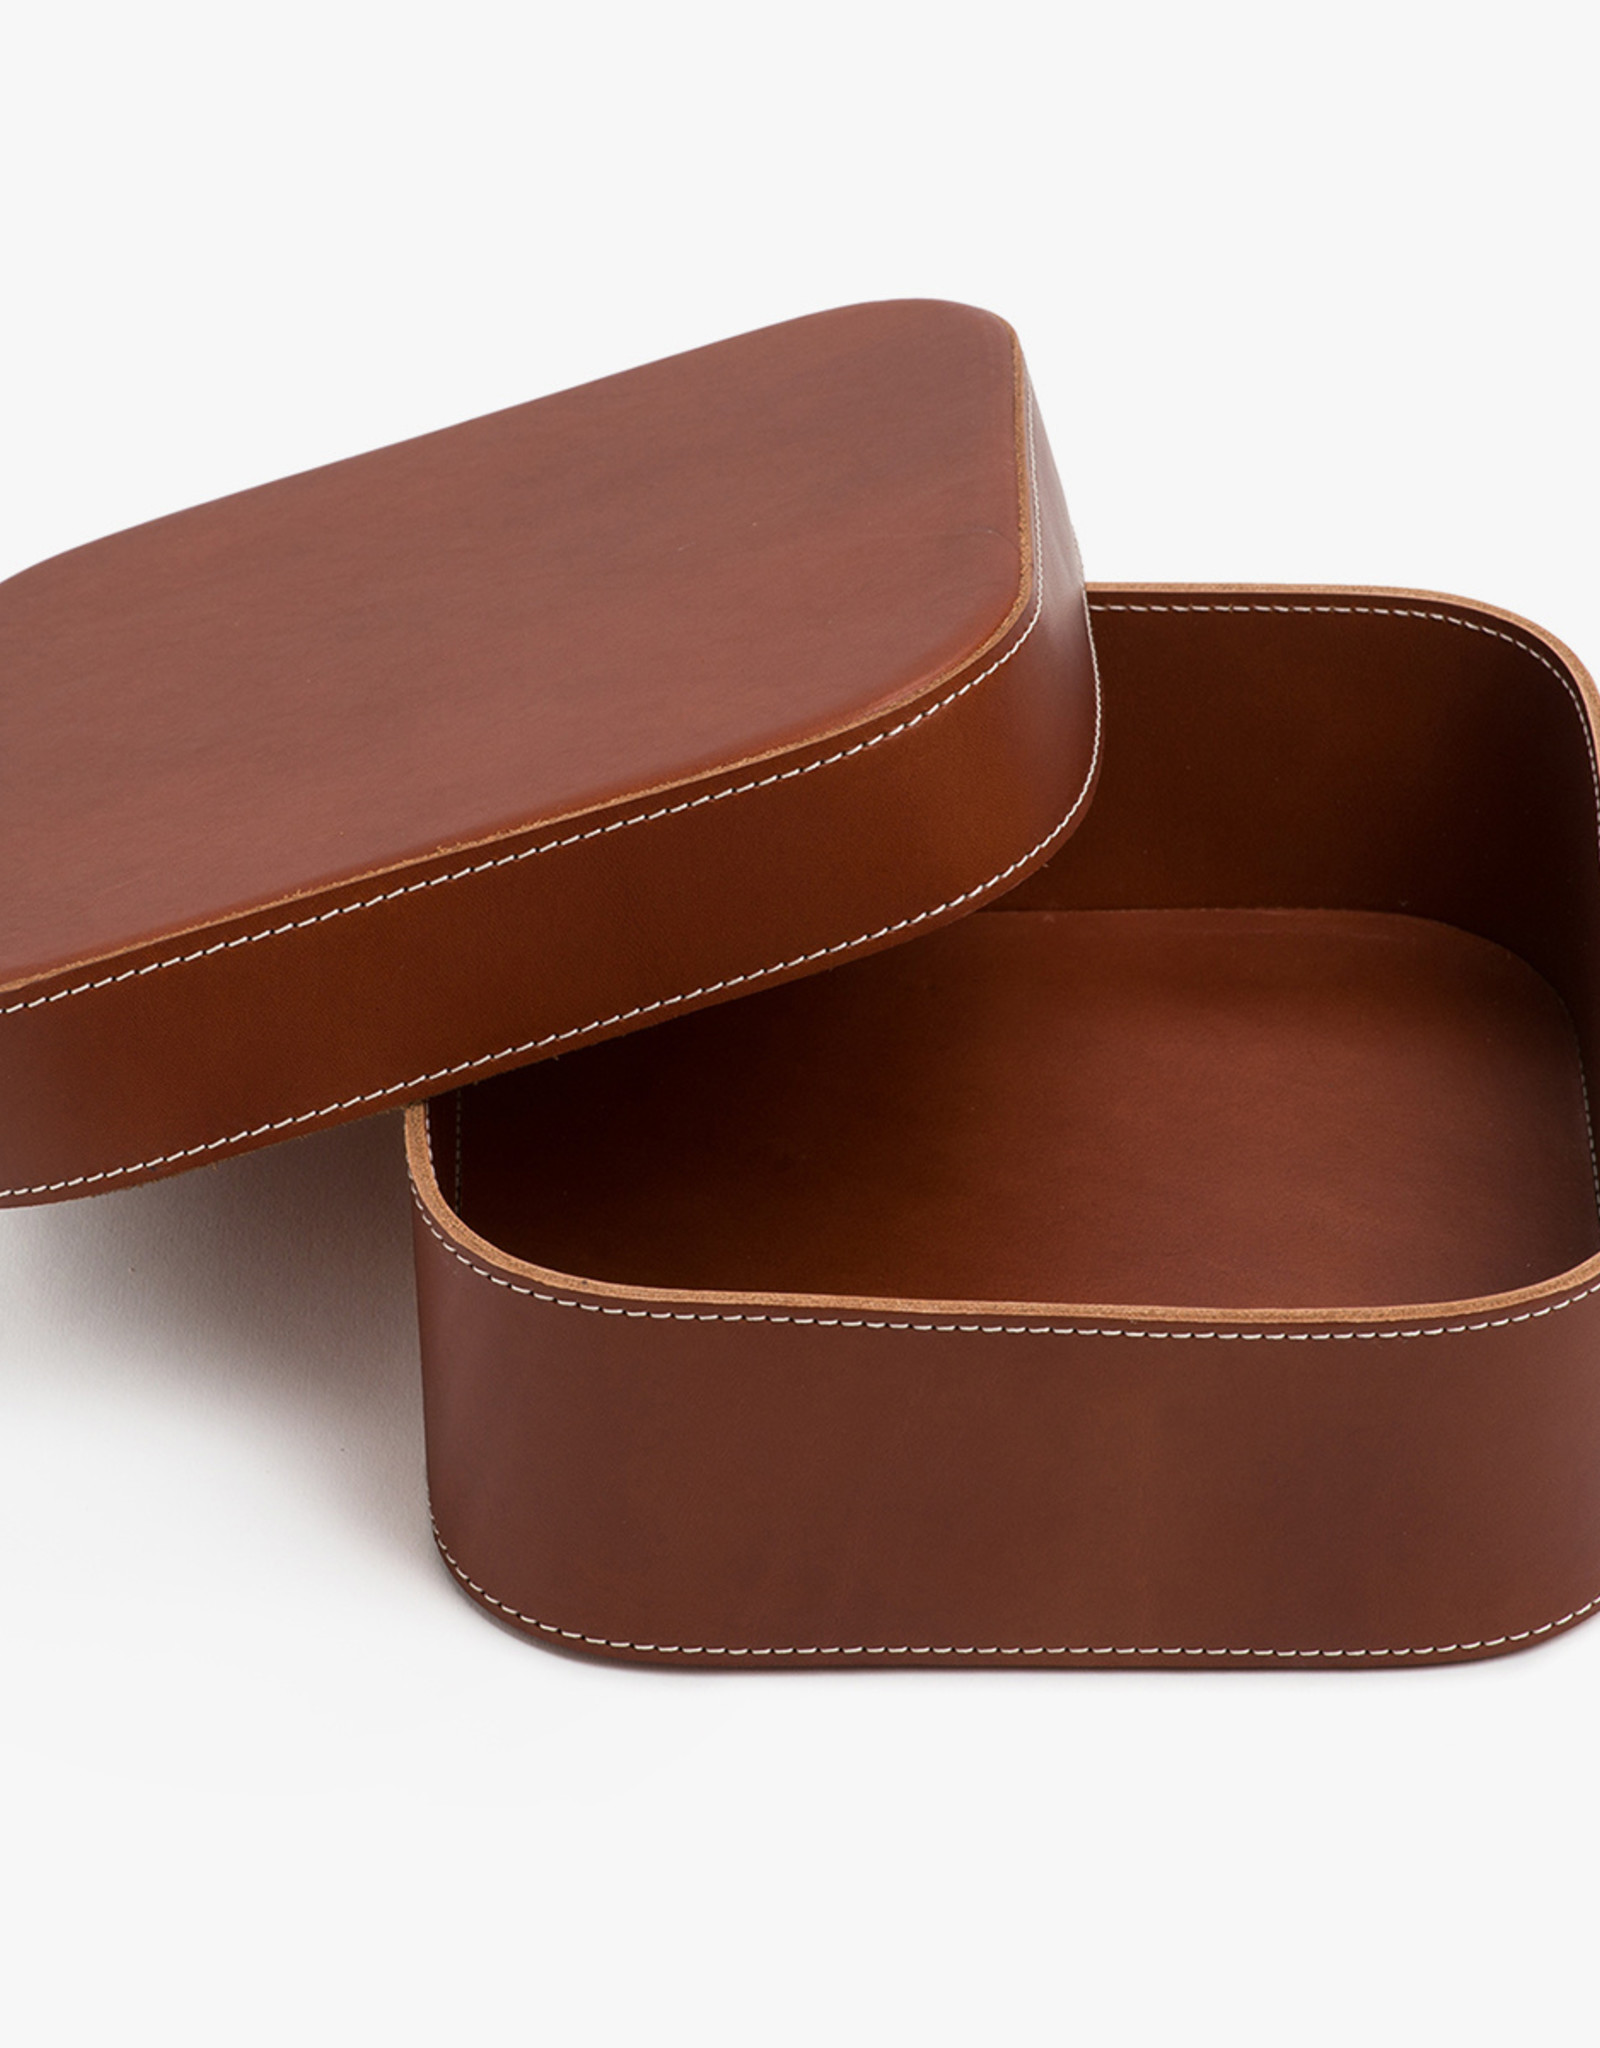 Large Leather Box by Palmgrens | Cognac leather